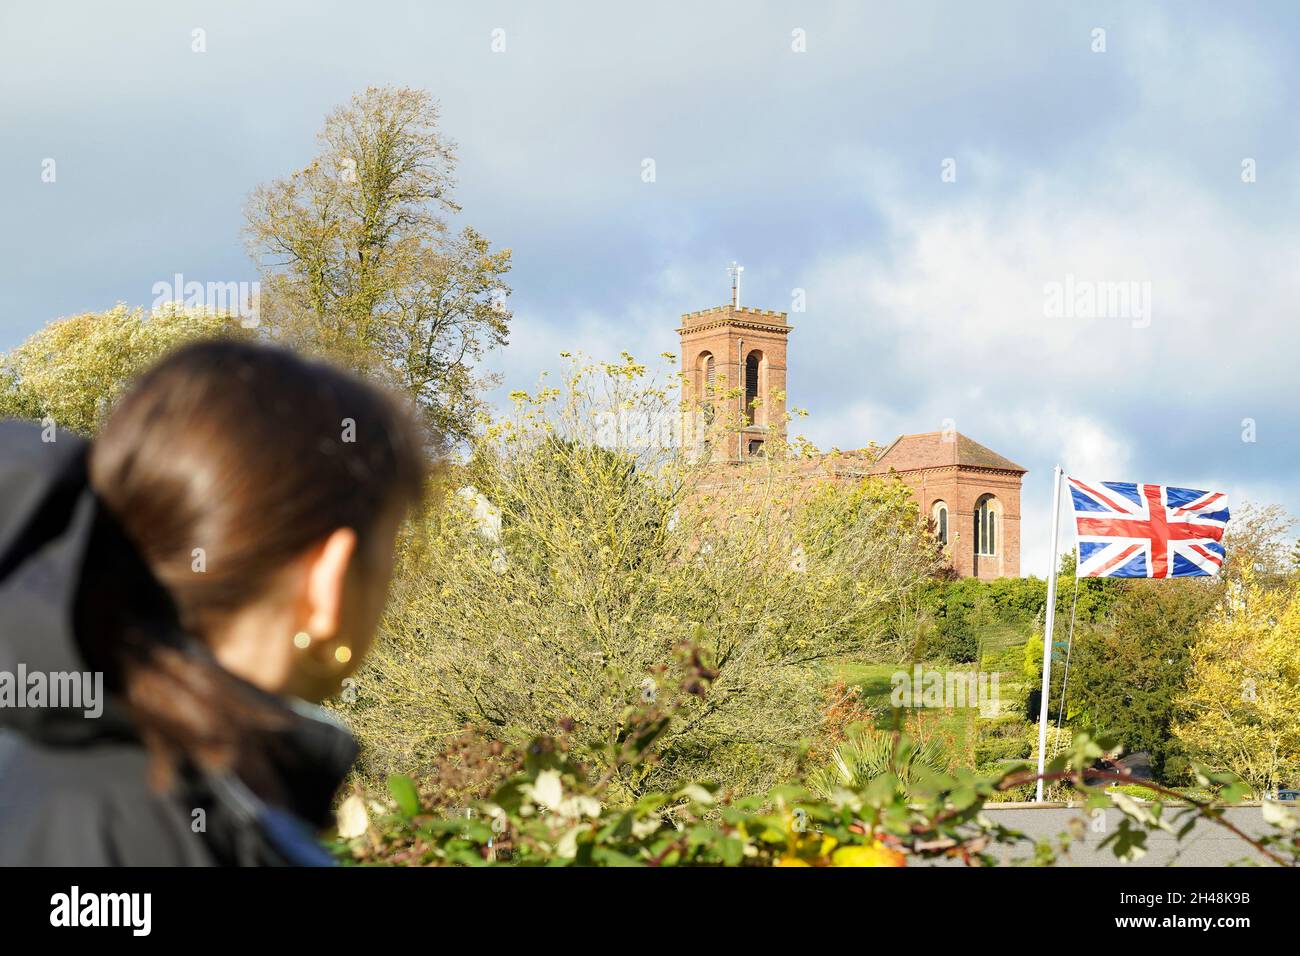 Rear view of a woman looking at a Union Jack flag blowing in the wind with a church in the distance. Stock Photo